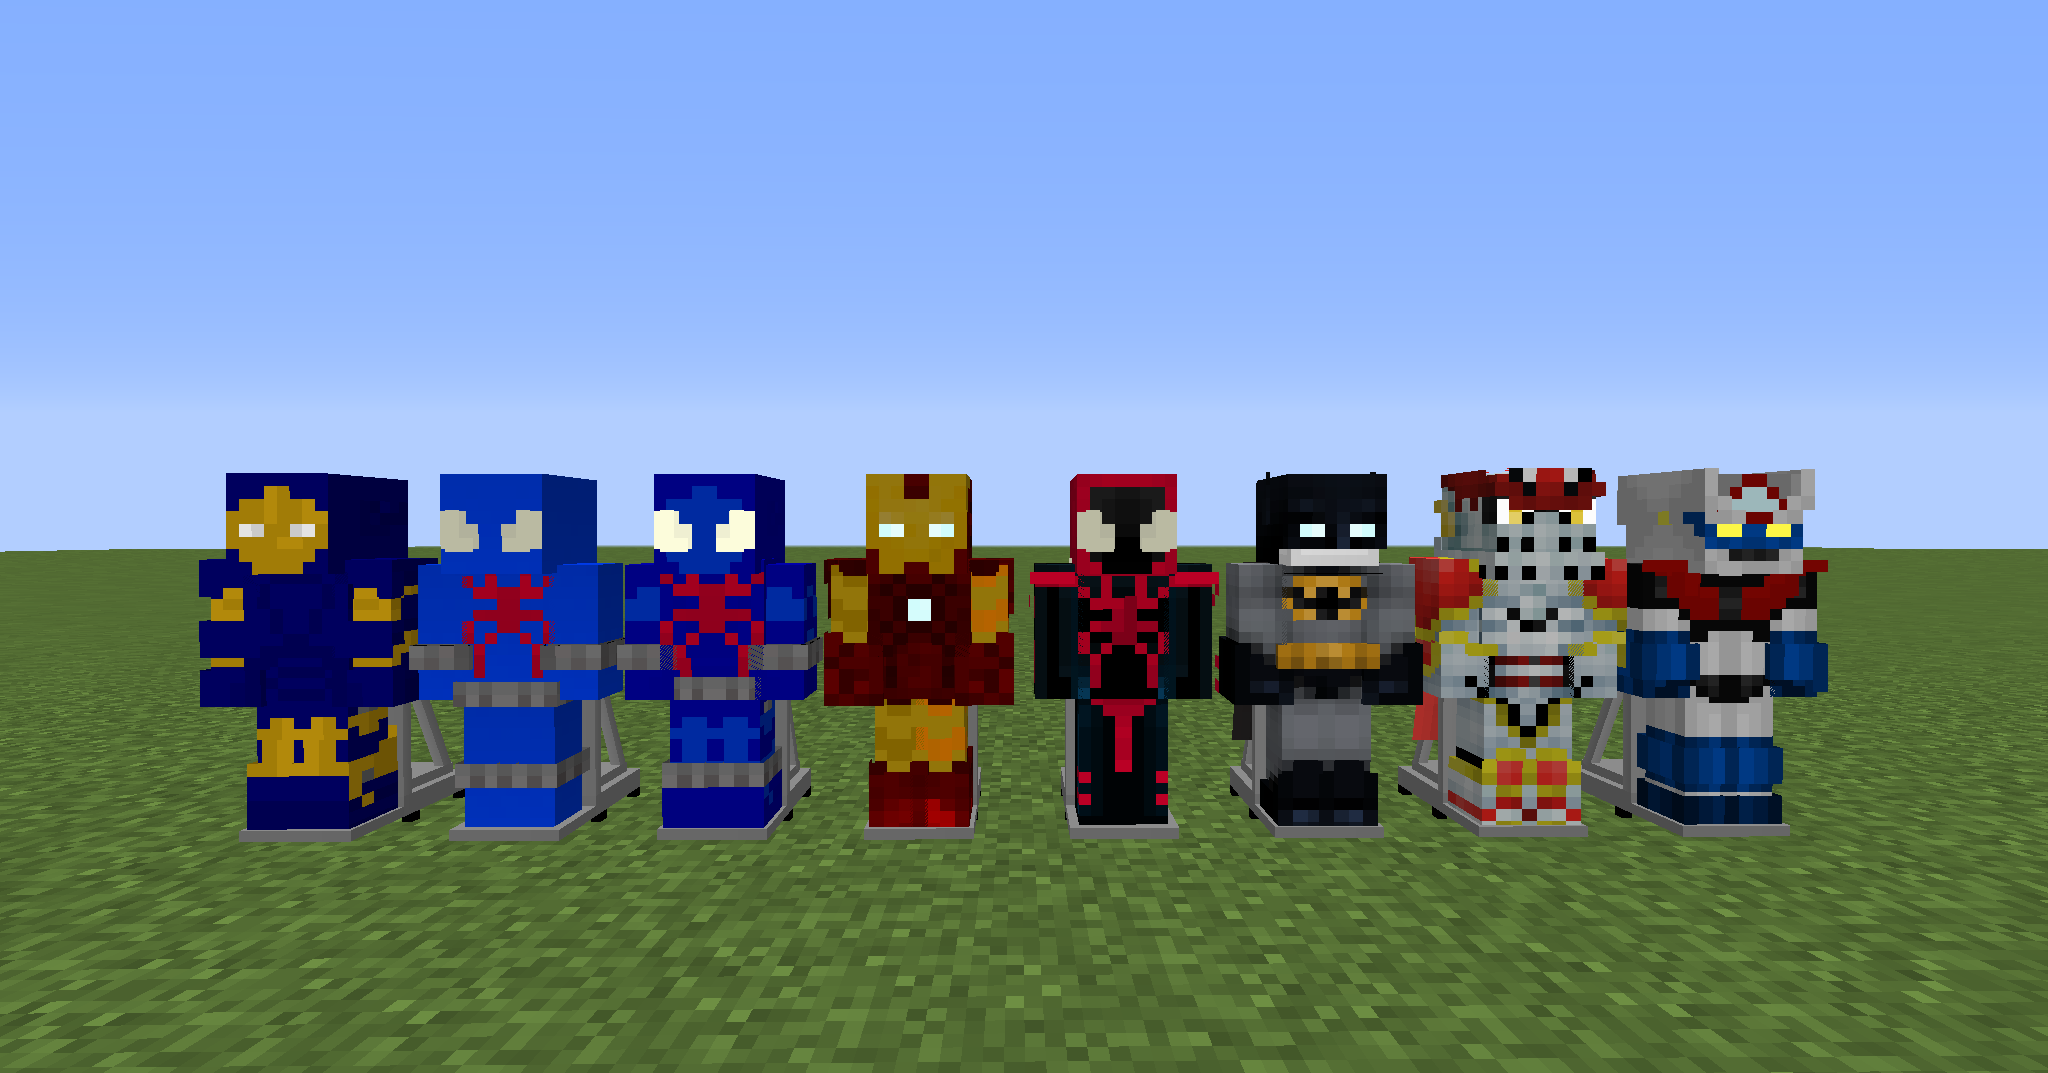 Мод fisk superheroes 1.12 2. Heroes Expansion Mod 1.12.2. Аддон на Heroes Expansion 1.12.2. Lucraft Core Mod 1.12.2. Мод Heroes Expansion.